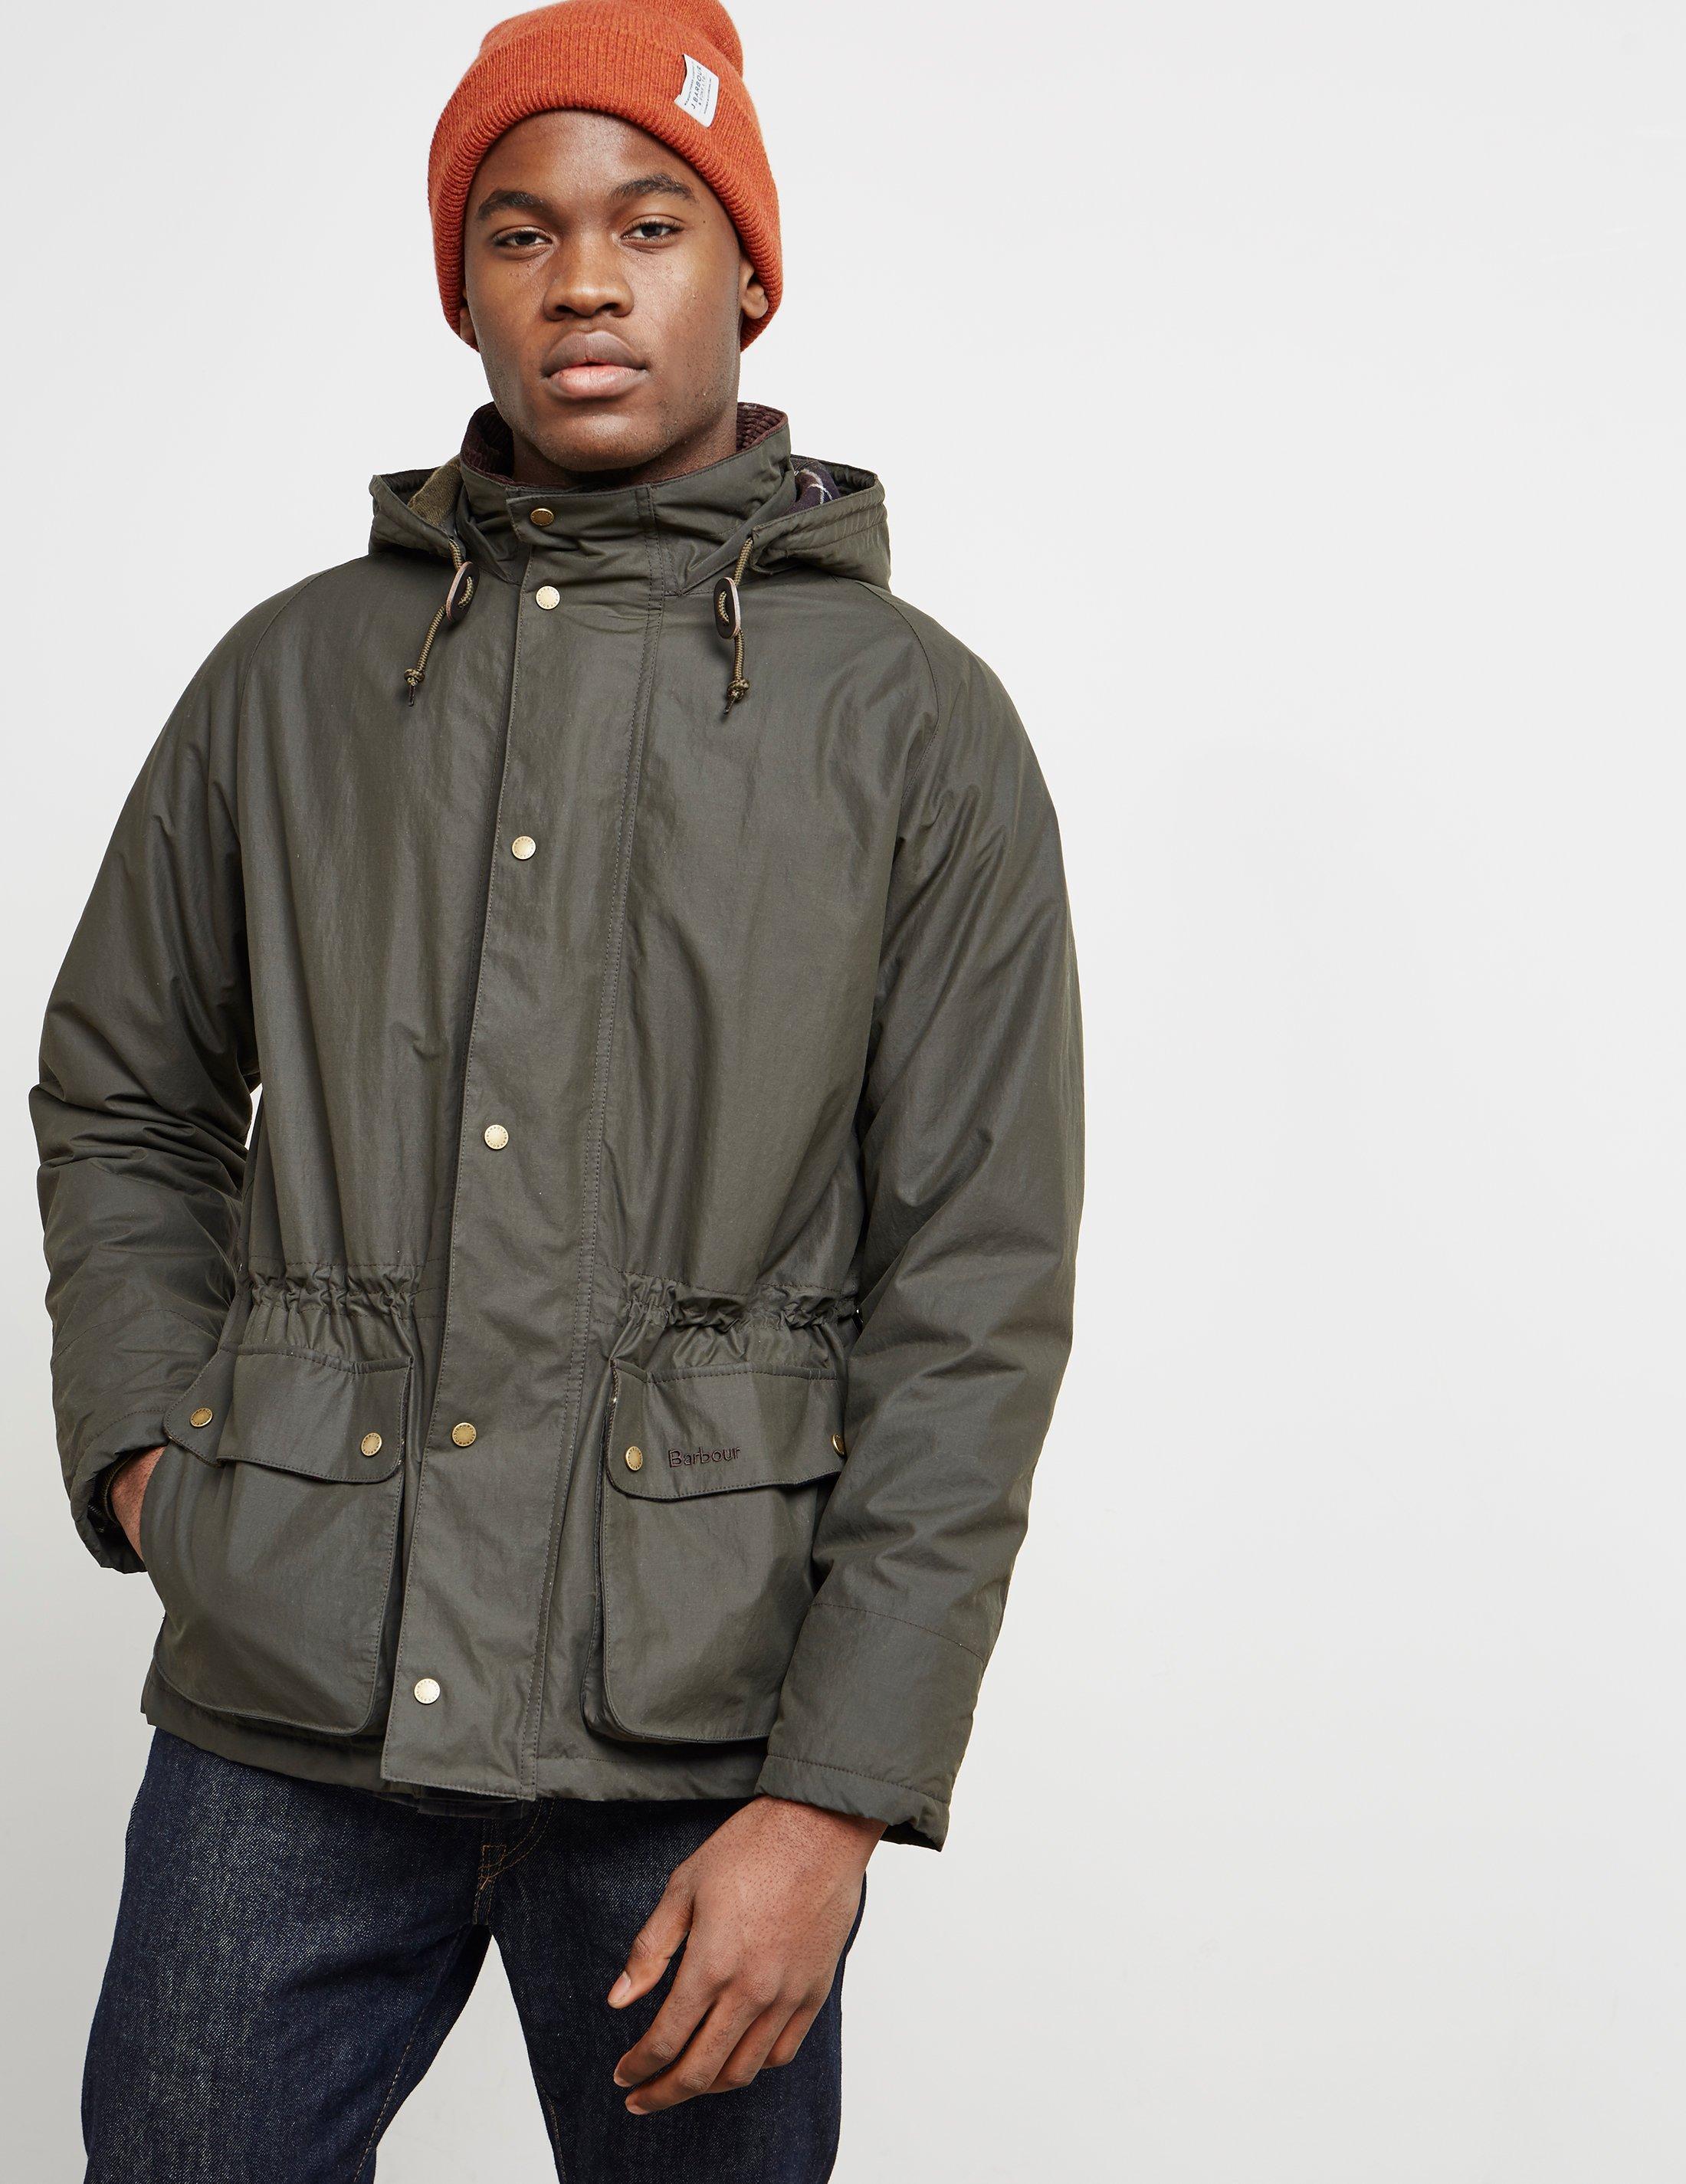 Barbour Corduroy Woodfold Jacket - Online Exlcusive Green for Men - Lyst